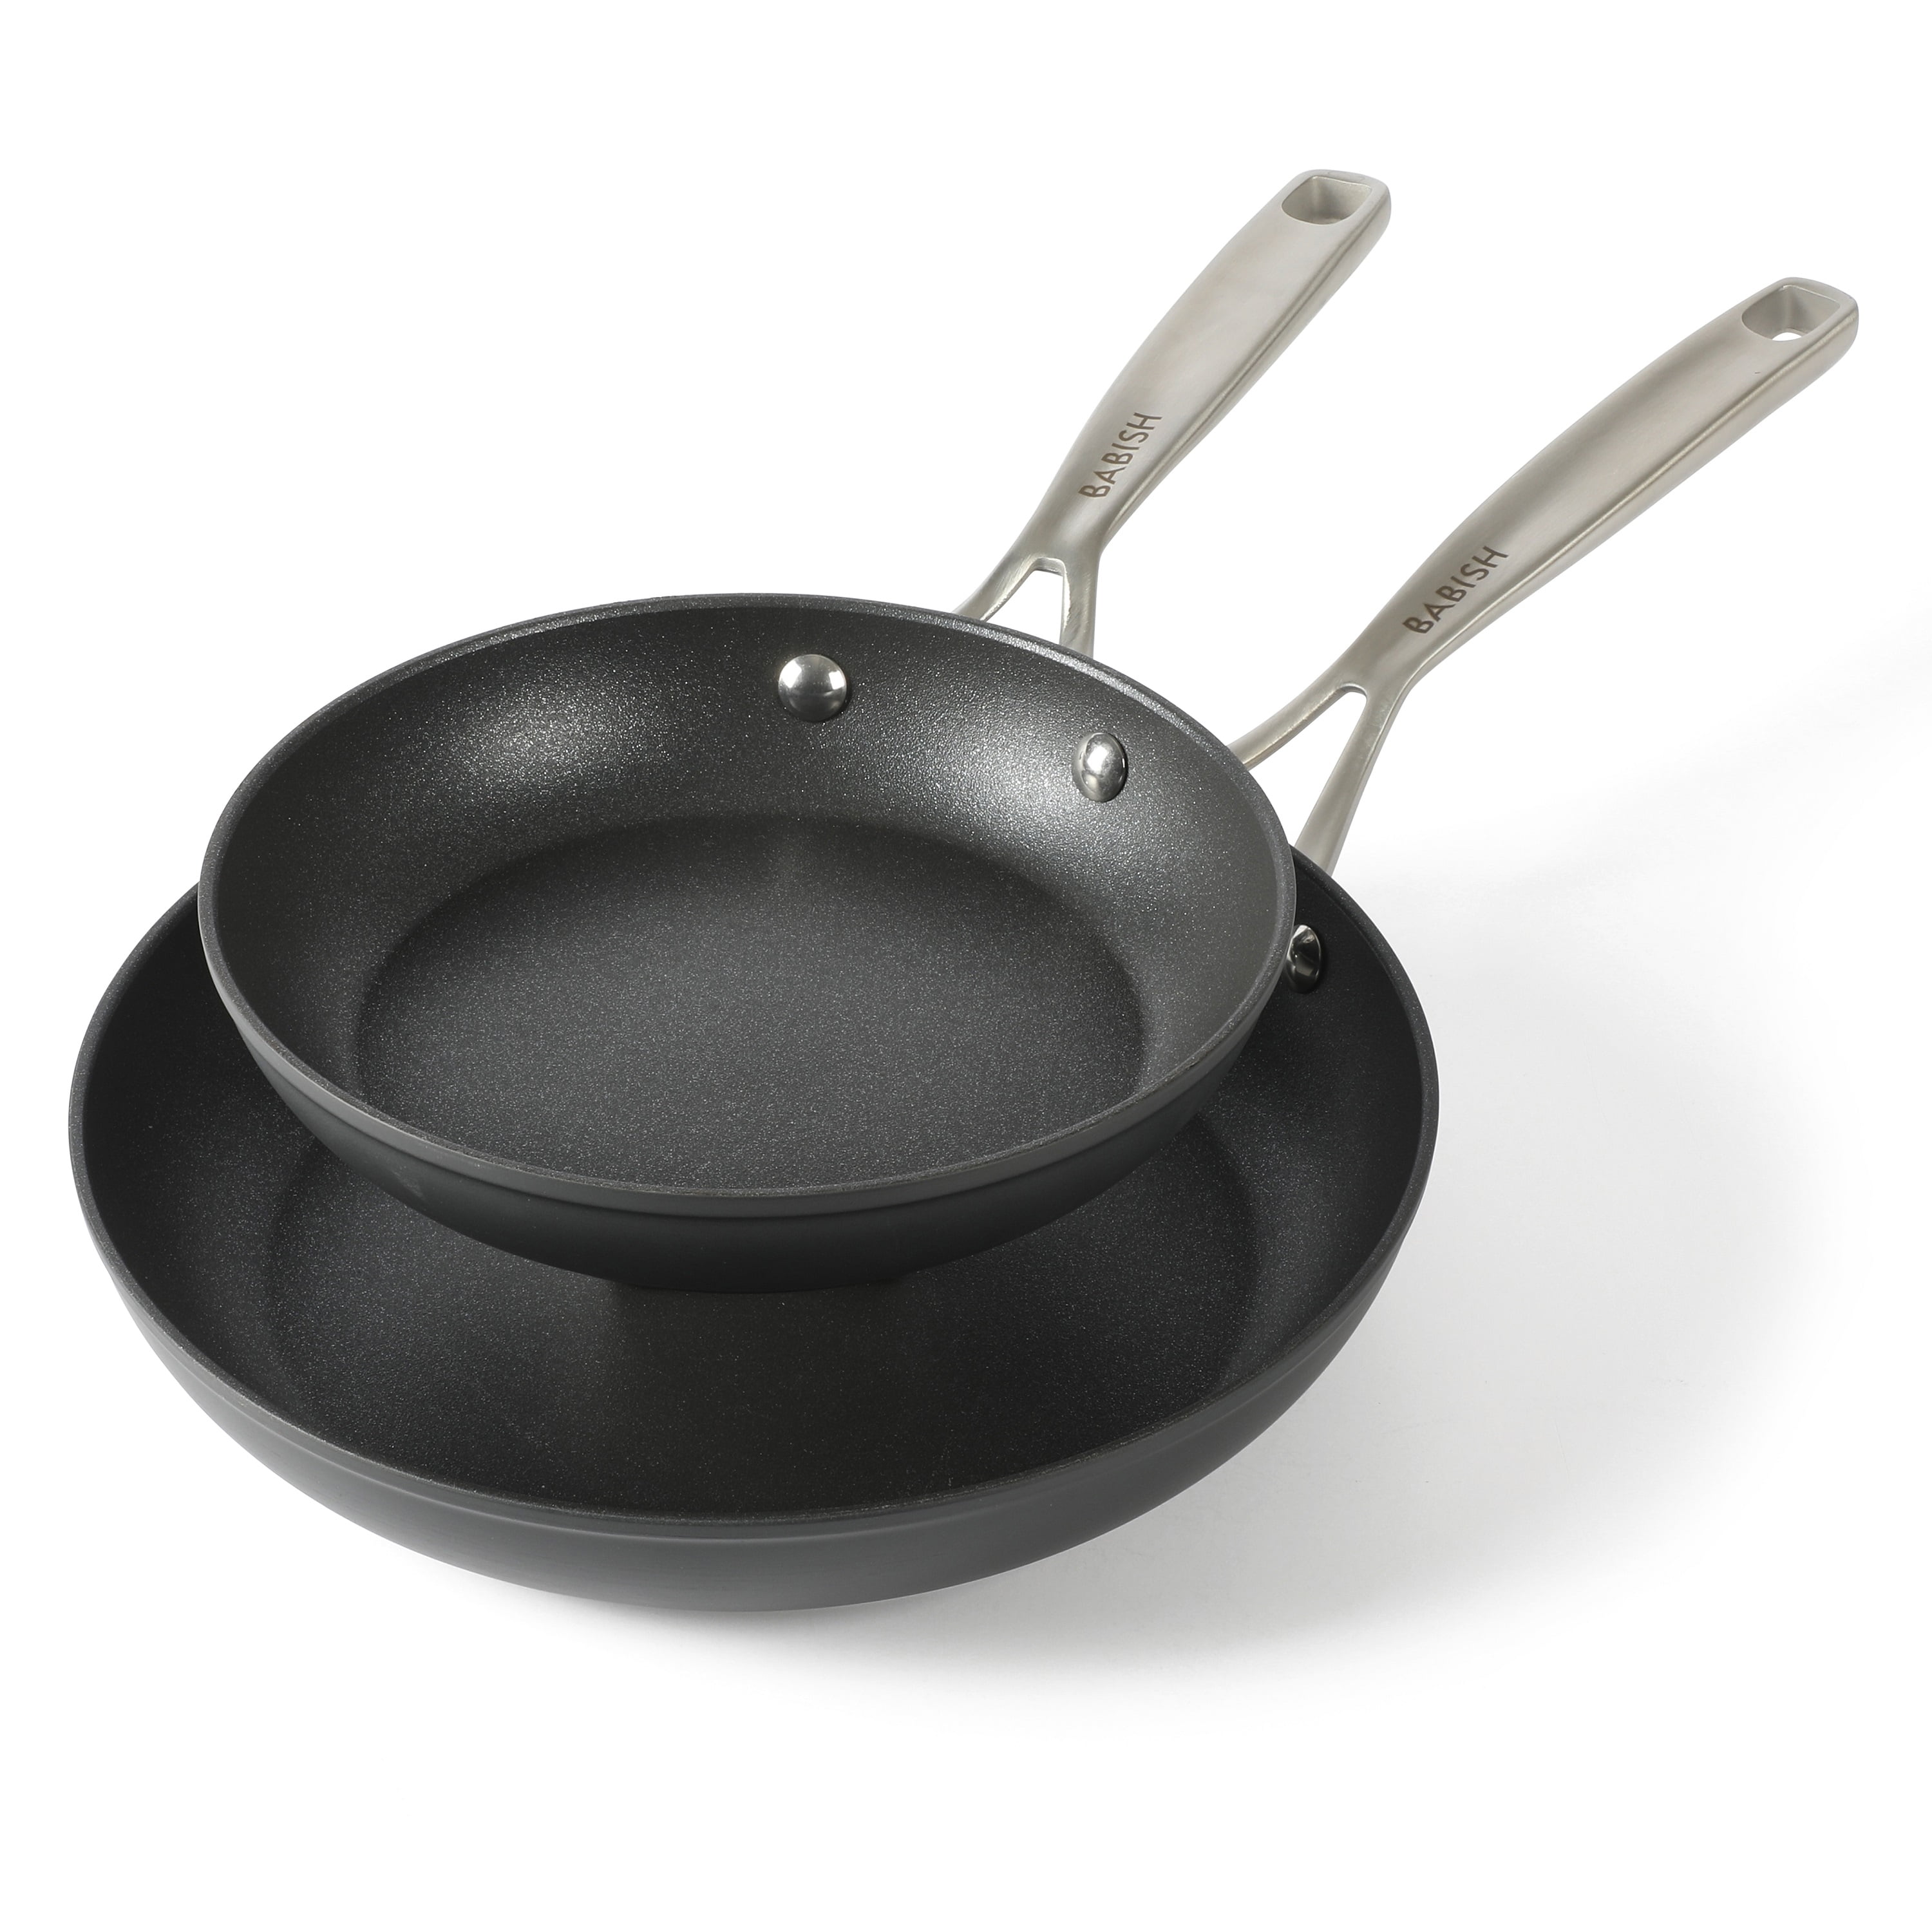 BREAKING NEWS! A new line of Babish Cookware is now available at  Walmart.com. Products are also coming to select Walmart stores next month,…